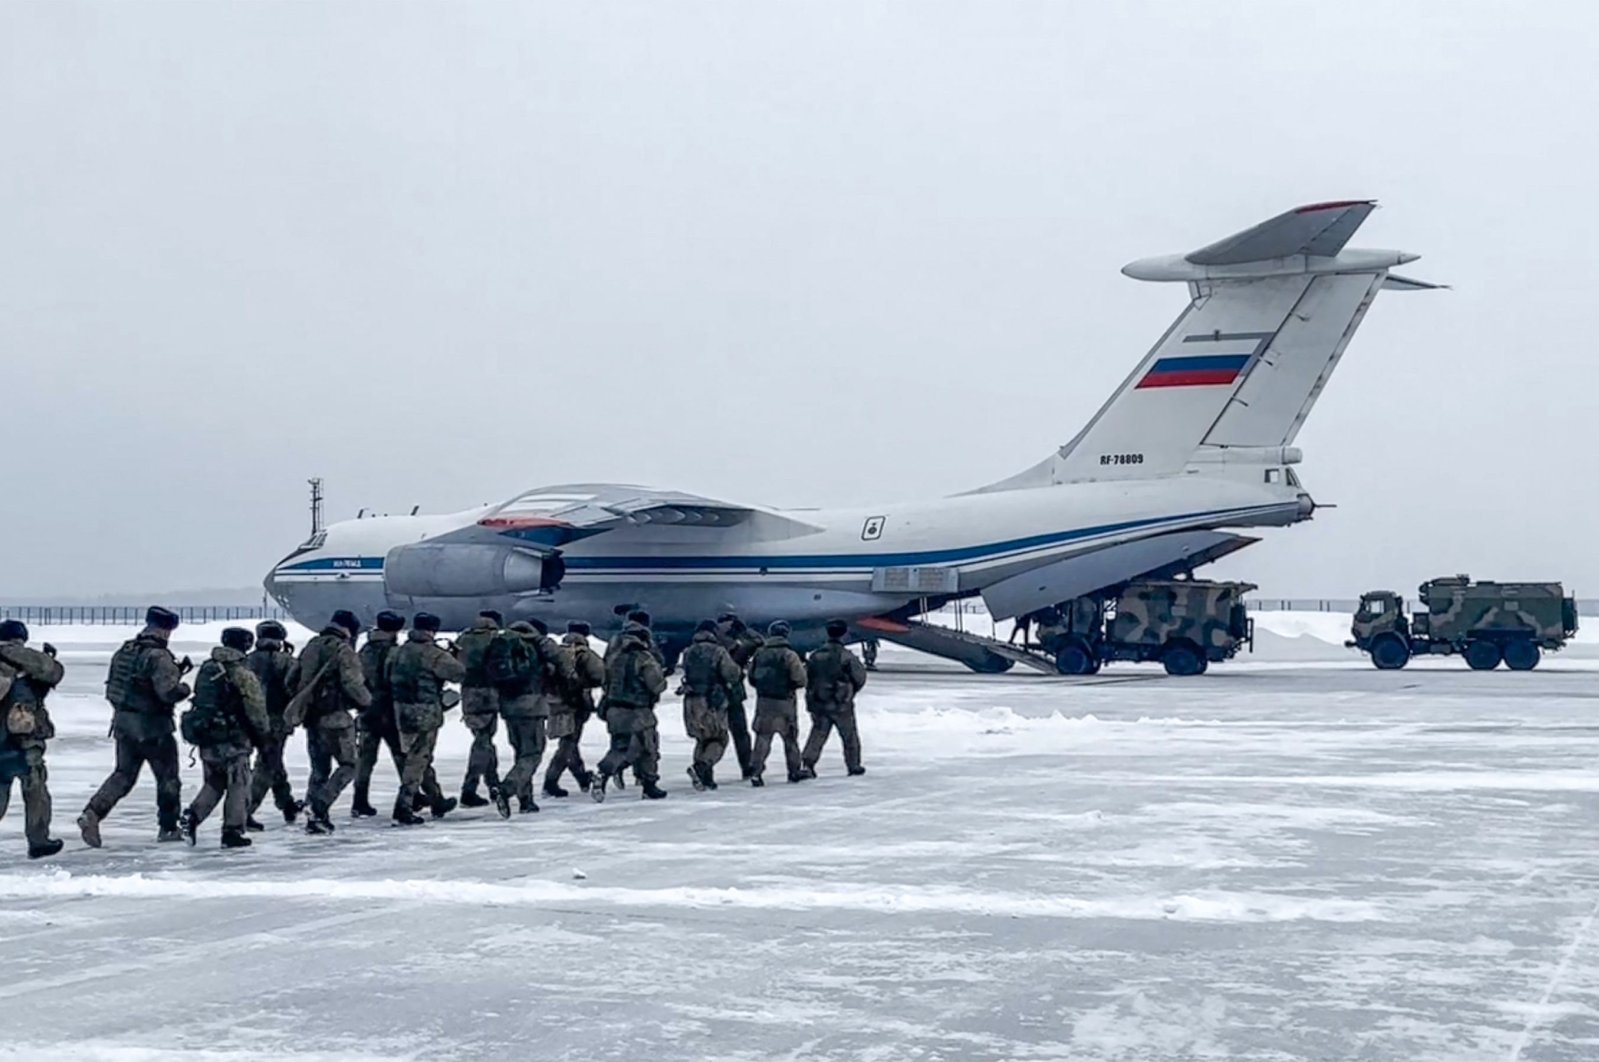 This handout image released by the Russian Defense Ministry shows Russian paratroopers boarding a military cargo plane to depart to Kazakhstan as a peacekeeping force at the Chkalovsky airport, outside Moscow, Russia, Jan. 6, 2021. (Russian Defense Ministry/ AFP)